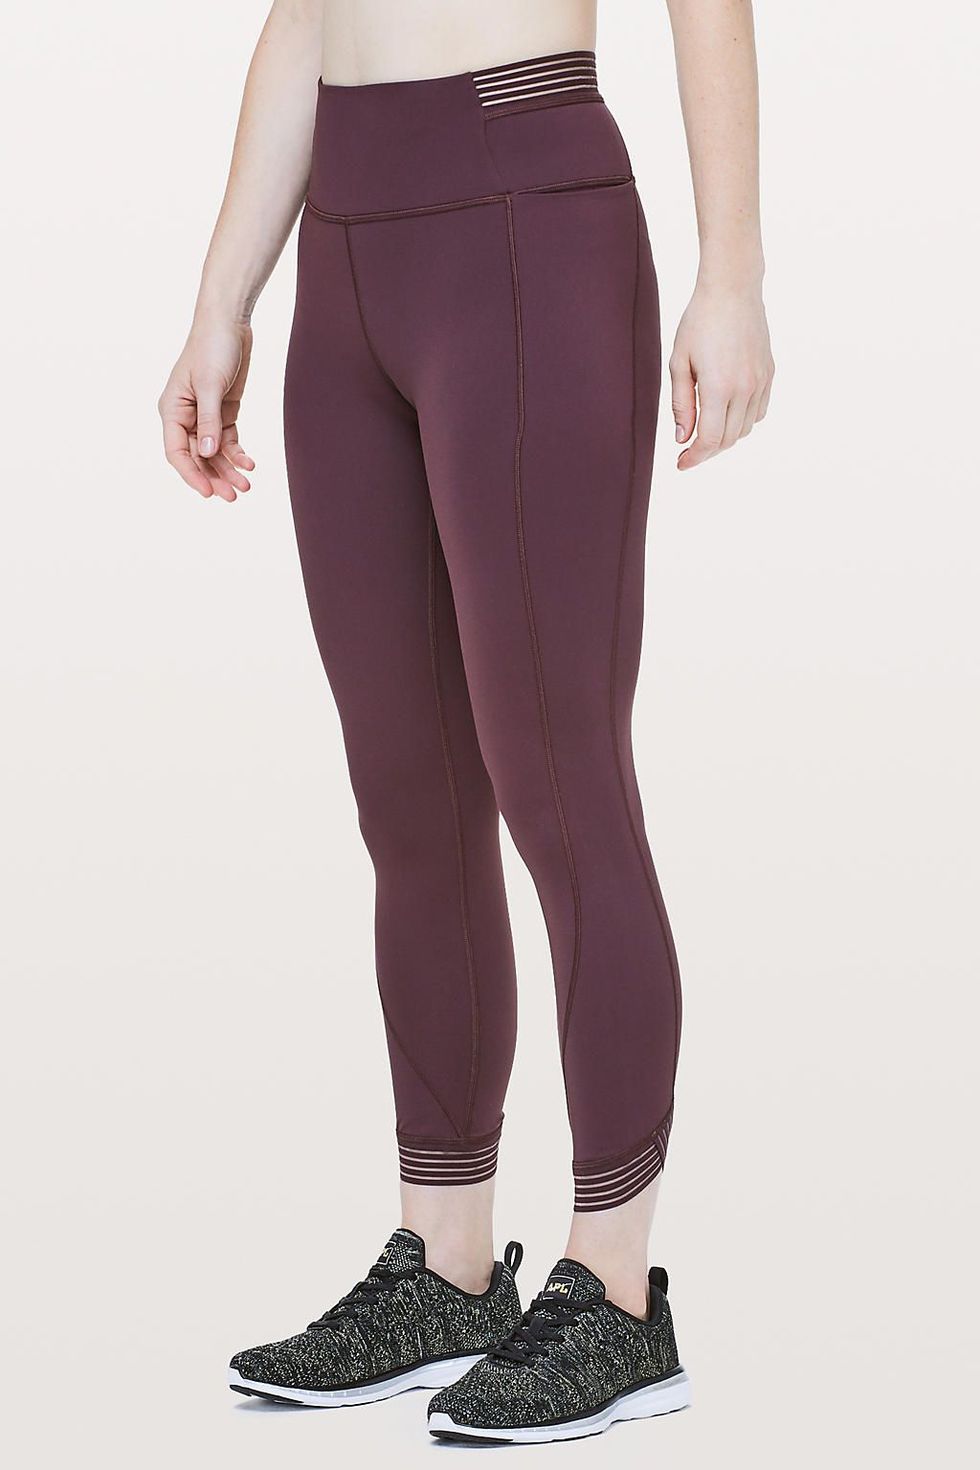 The Best Leggings For You, Based On Your Zodiac Sign